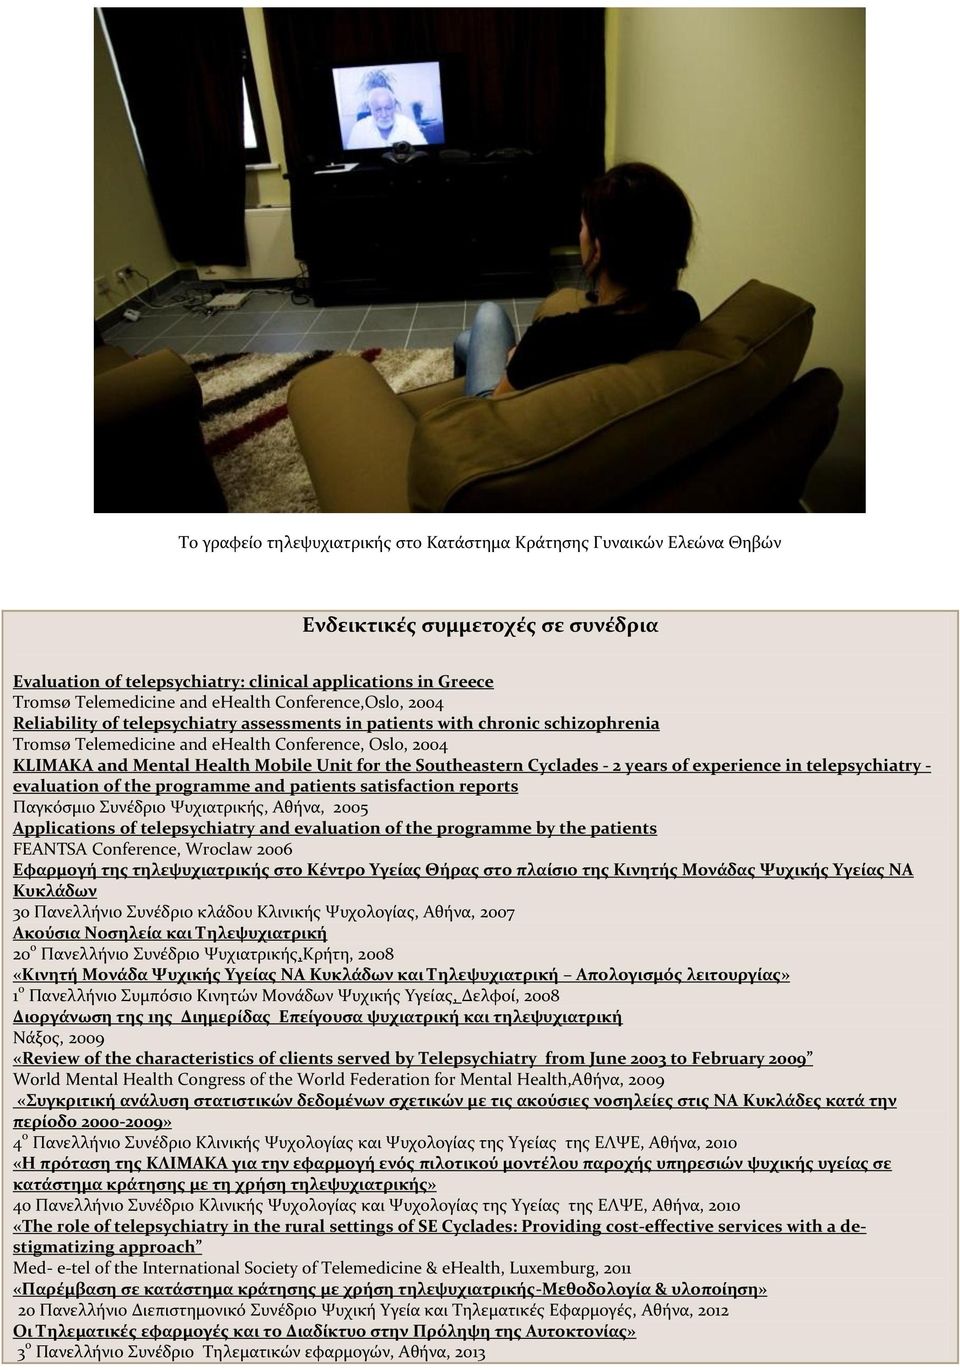 Unit for the Southeastern Cyclades - 2 years of experience in telepsychiatry - evaluation of the programme and patients satisfaction reports Παγκόσμιο Συνέδριο Ψυχιατρικής, Αθήνα, 2005 Applications